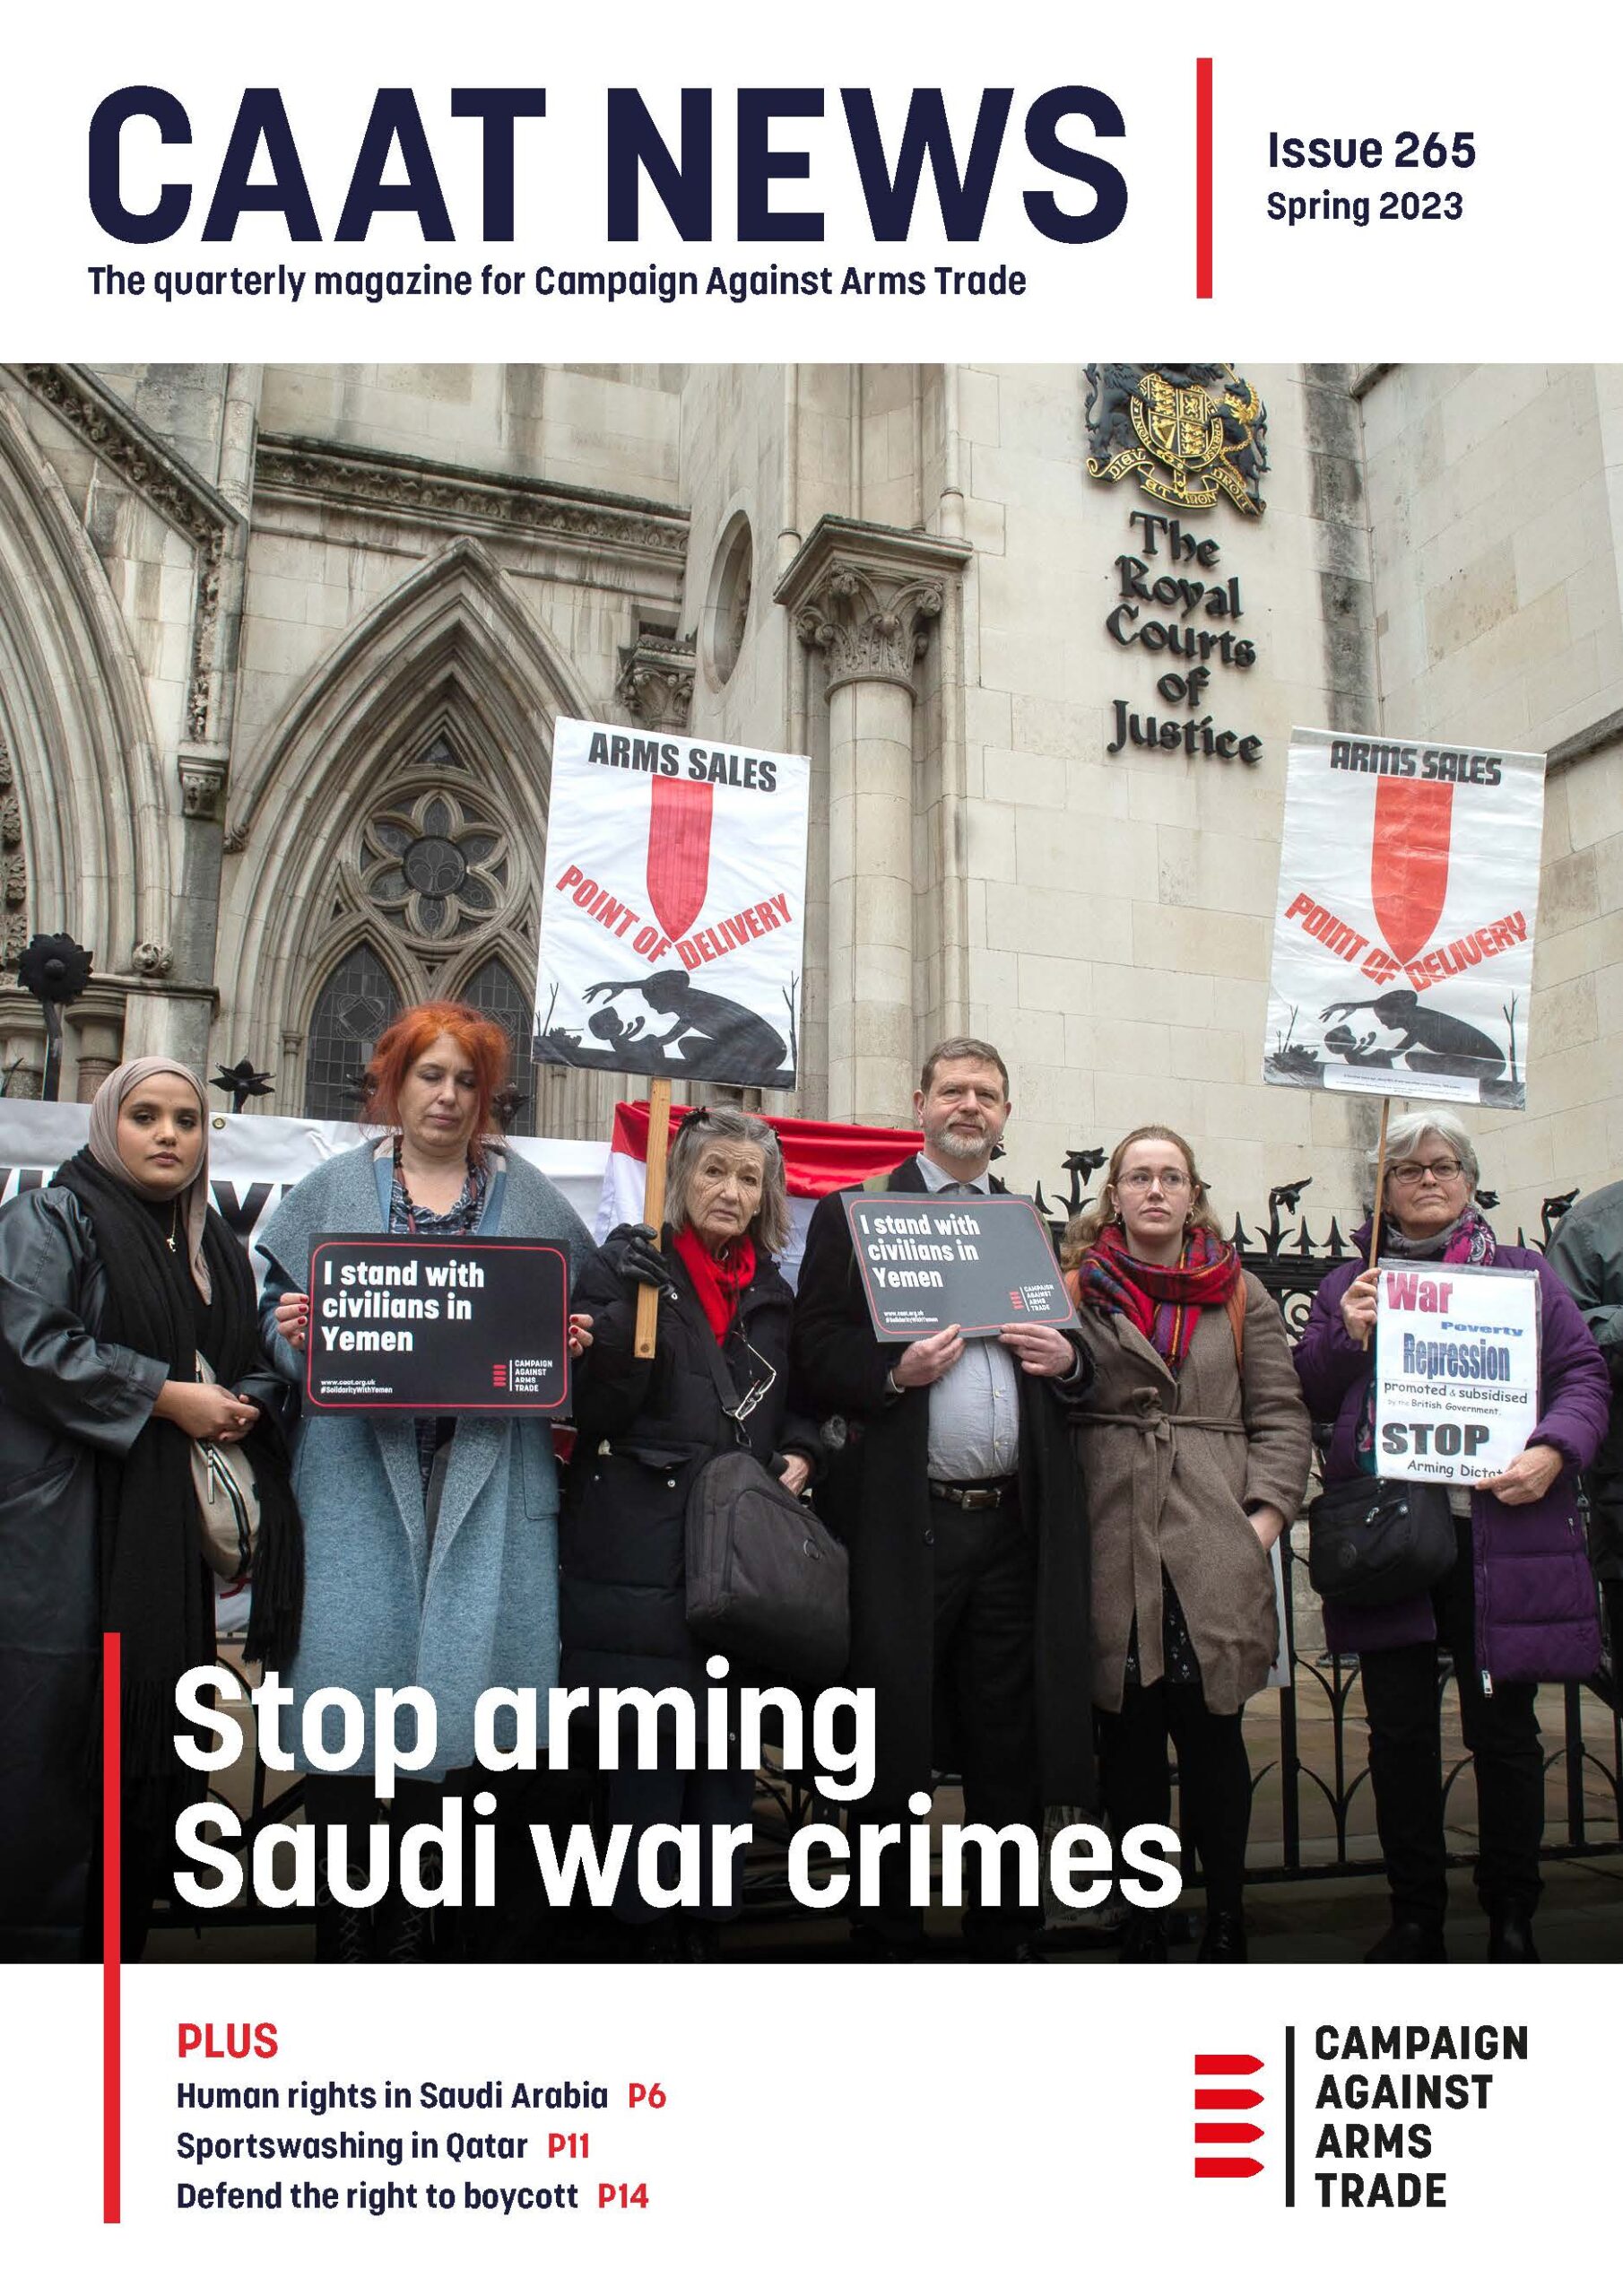 CAAT News cover page. Text: "CAAT News, the quarterly magazine for Campaign Against Arms Trade, Issue 265, Spring 2023". Image of 5 protestors outside Royal Courts of Justice with placards saying "I stand with civilians in Yemen", "Arms sales point of delivery" with image of bomb falling on parent and child, and "War, poverty, repression, promoted & subsidised by the British Government. Stop arming dictators." Text over image: "Stop arming Saudi war crimes". Text below image: "Plus: Human rights in Saudi Arabia p6. Sportswashing in Qatar p11. Defend the right to boycott p14." CAAT logo in bottom right corner.